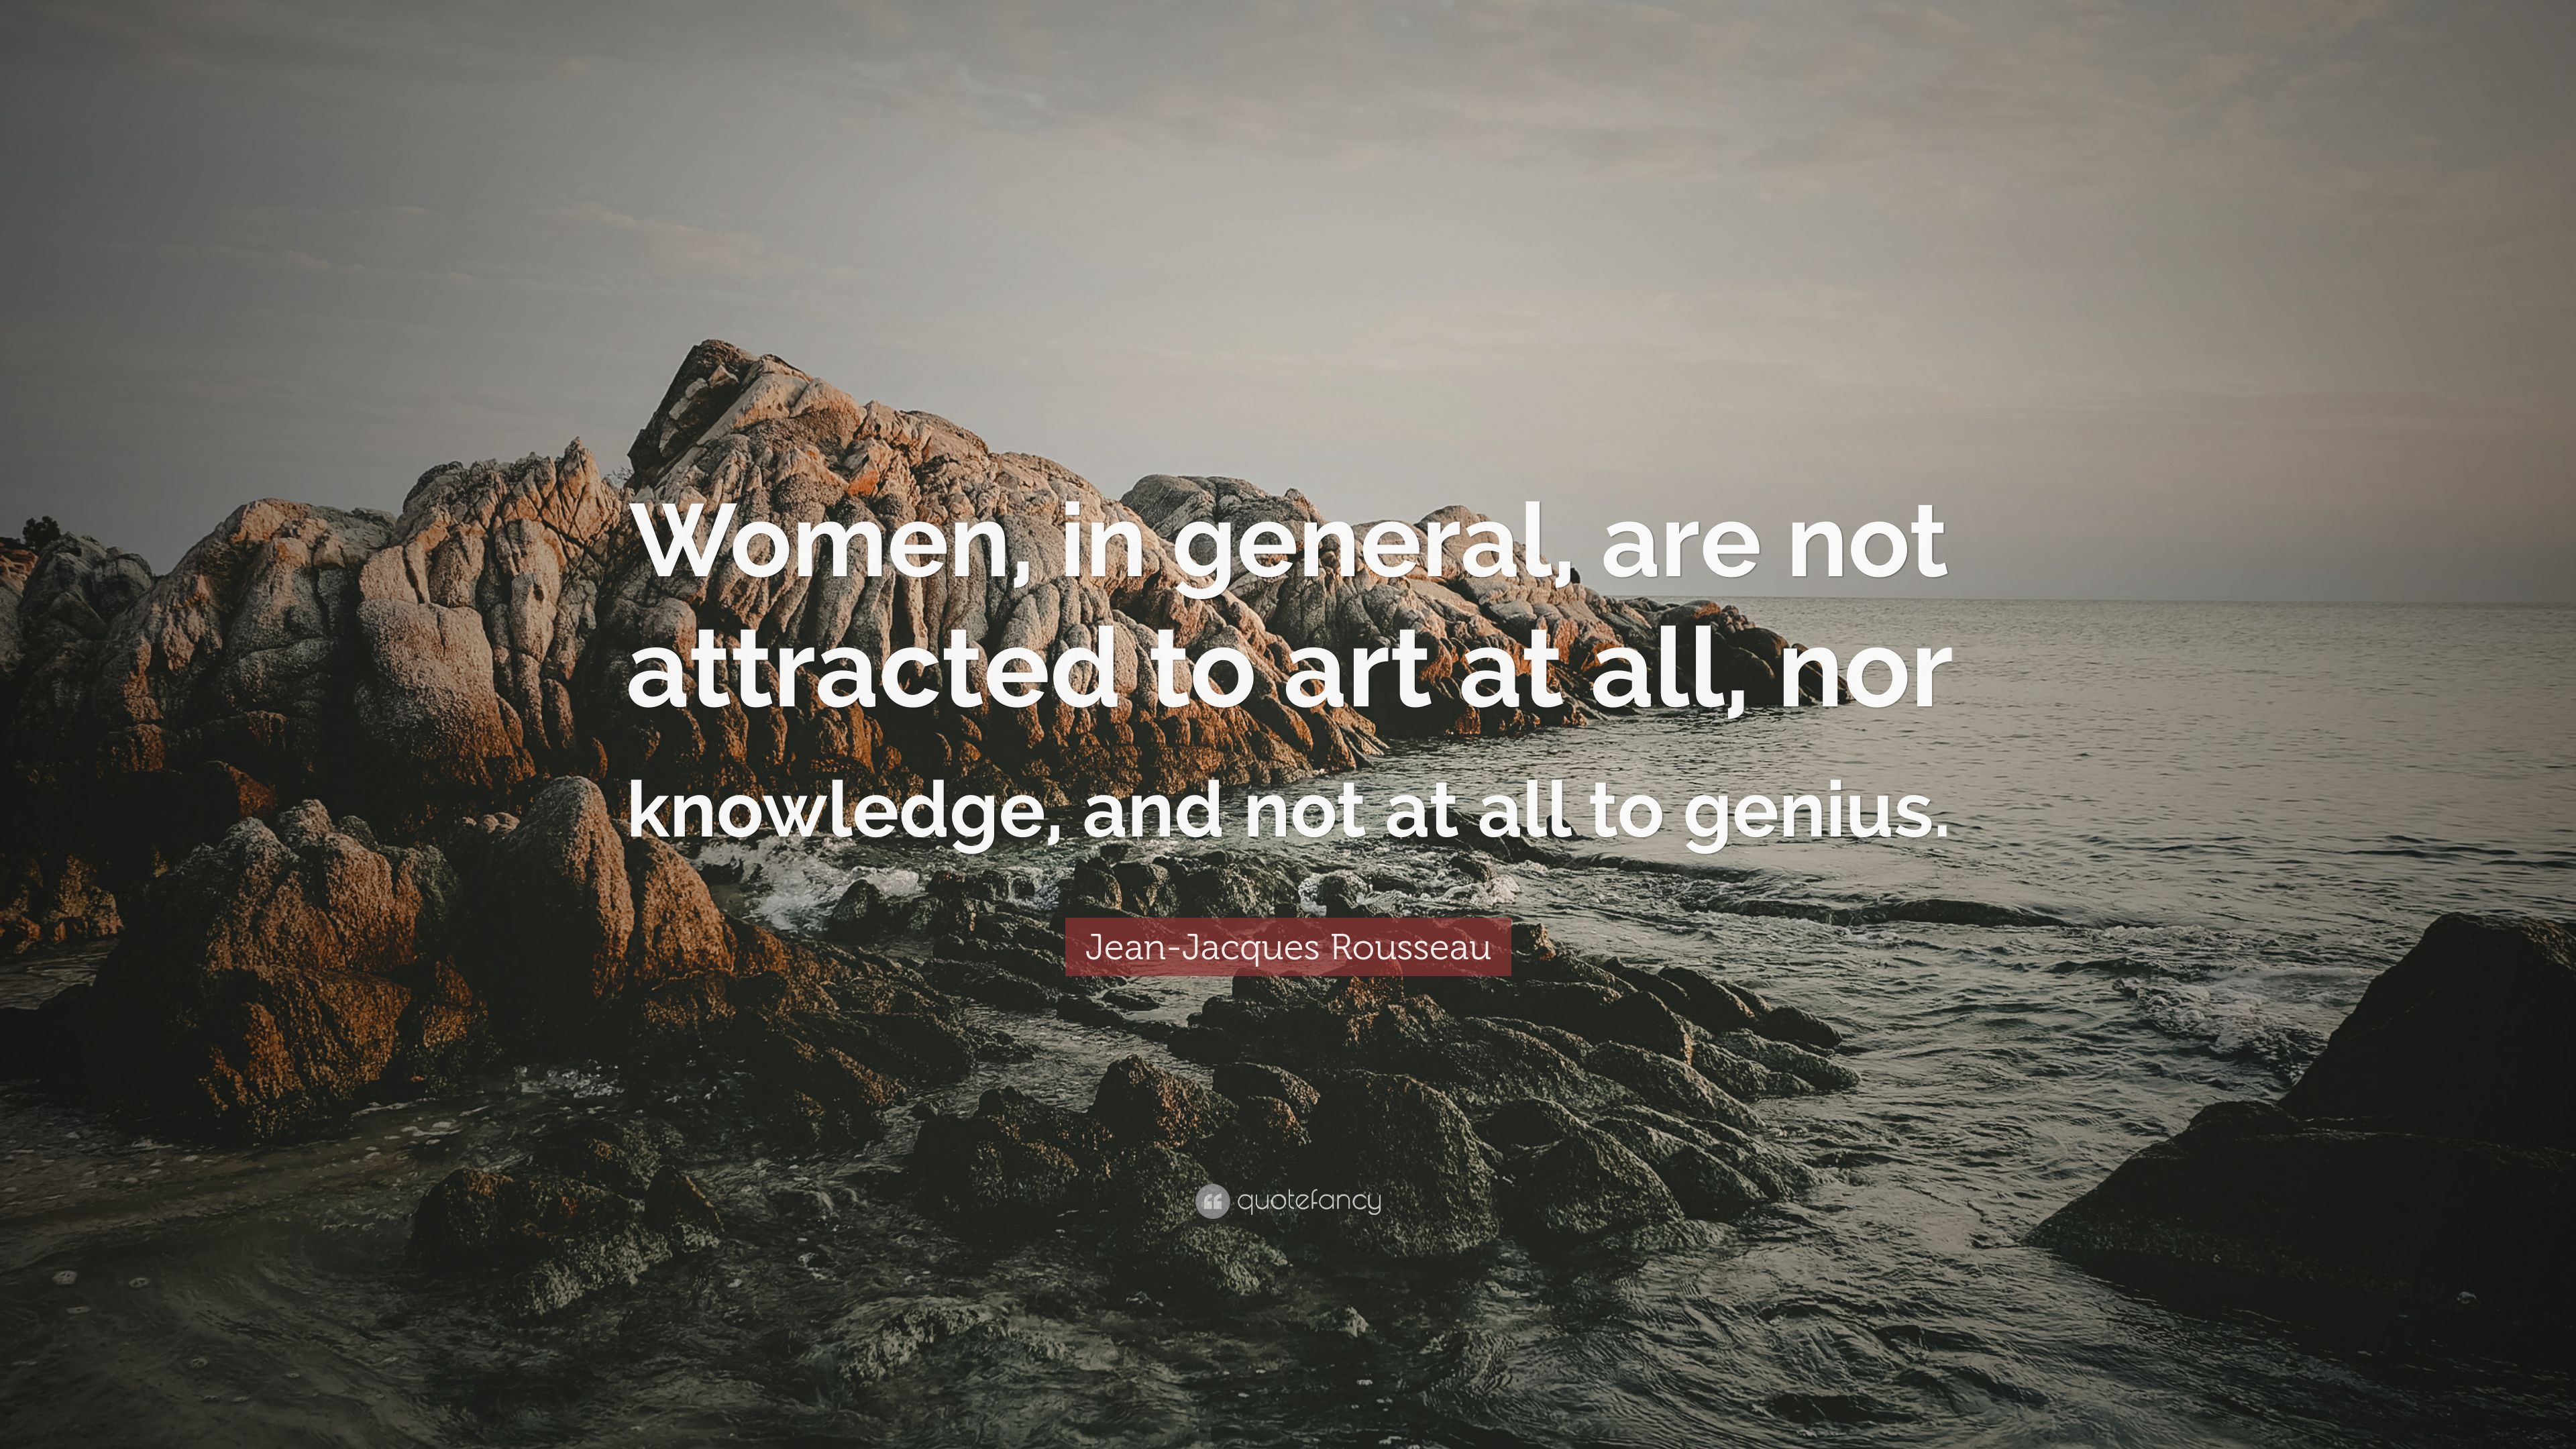 Jean Jacques Rousseau Quote: “Women, In General, Are Not Attracted To Art At All, Nor Knowledge, And Not At All To Genius.” (7 Wallpaper)